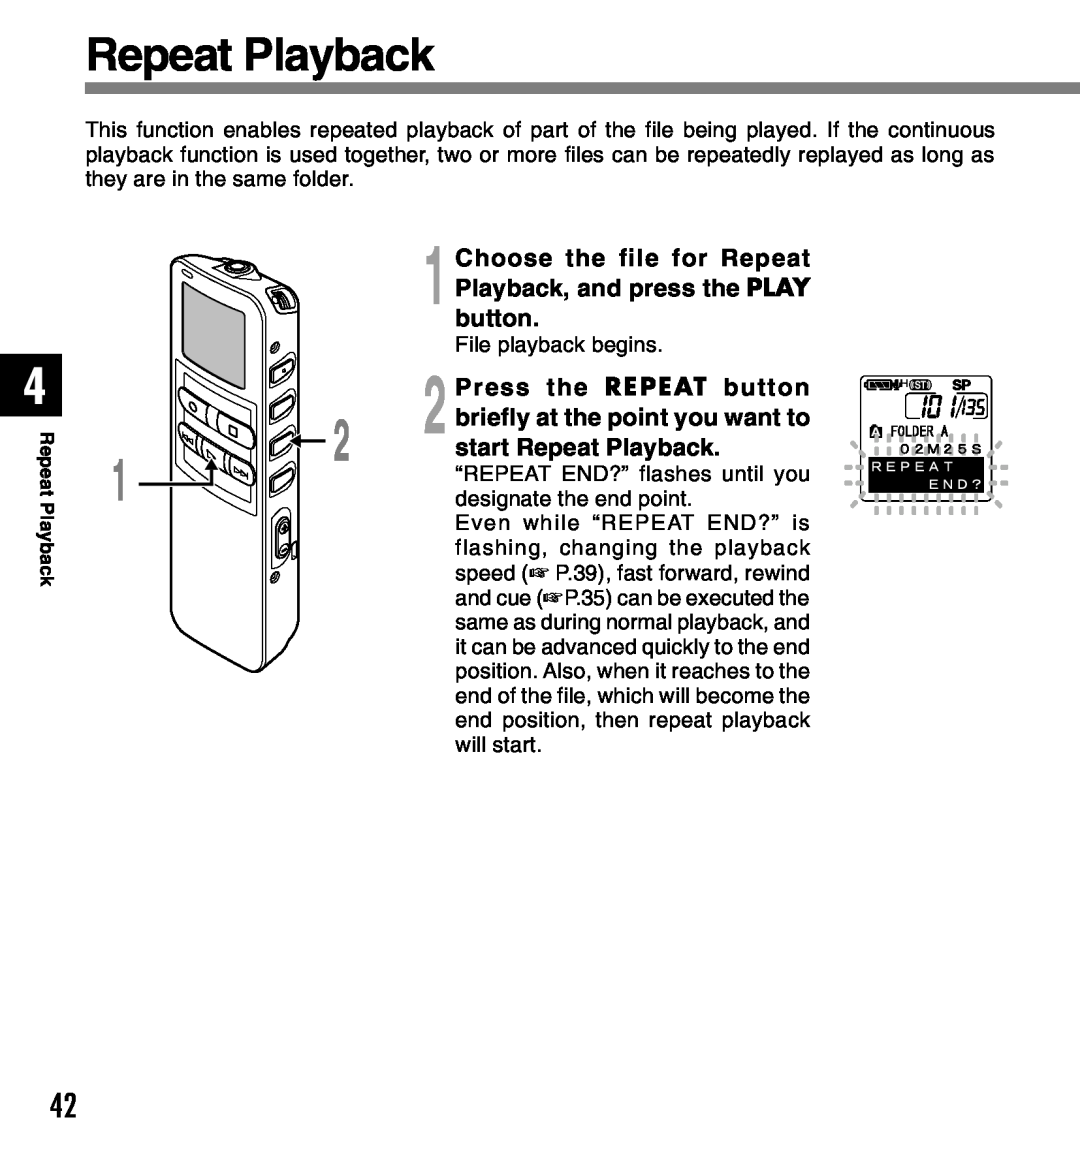 Olympus 2 manual Repeat Playback, Choose the file for Repeat, Press the REPEAT button, briefly at the point you want to 